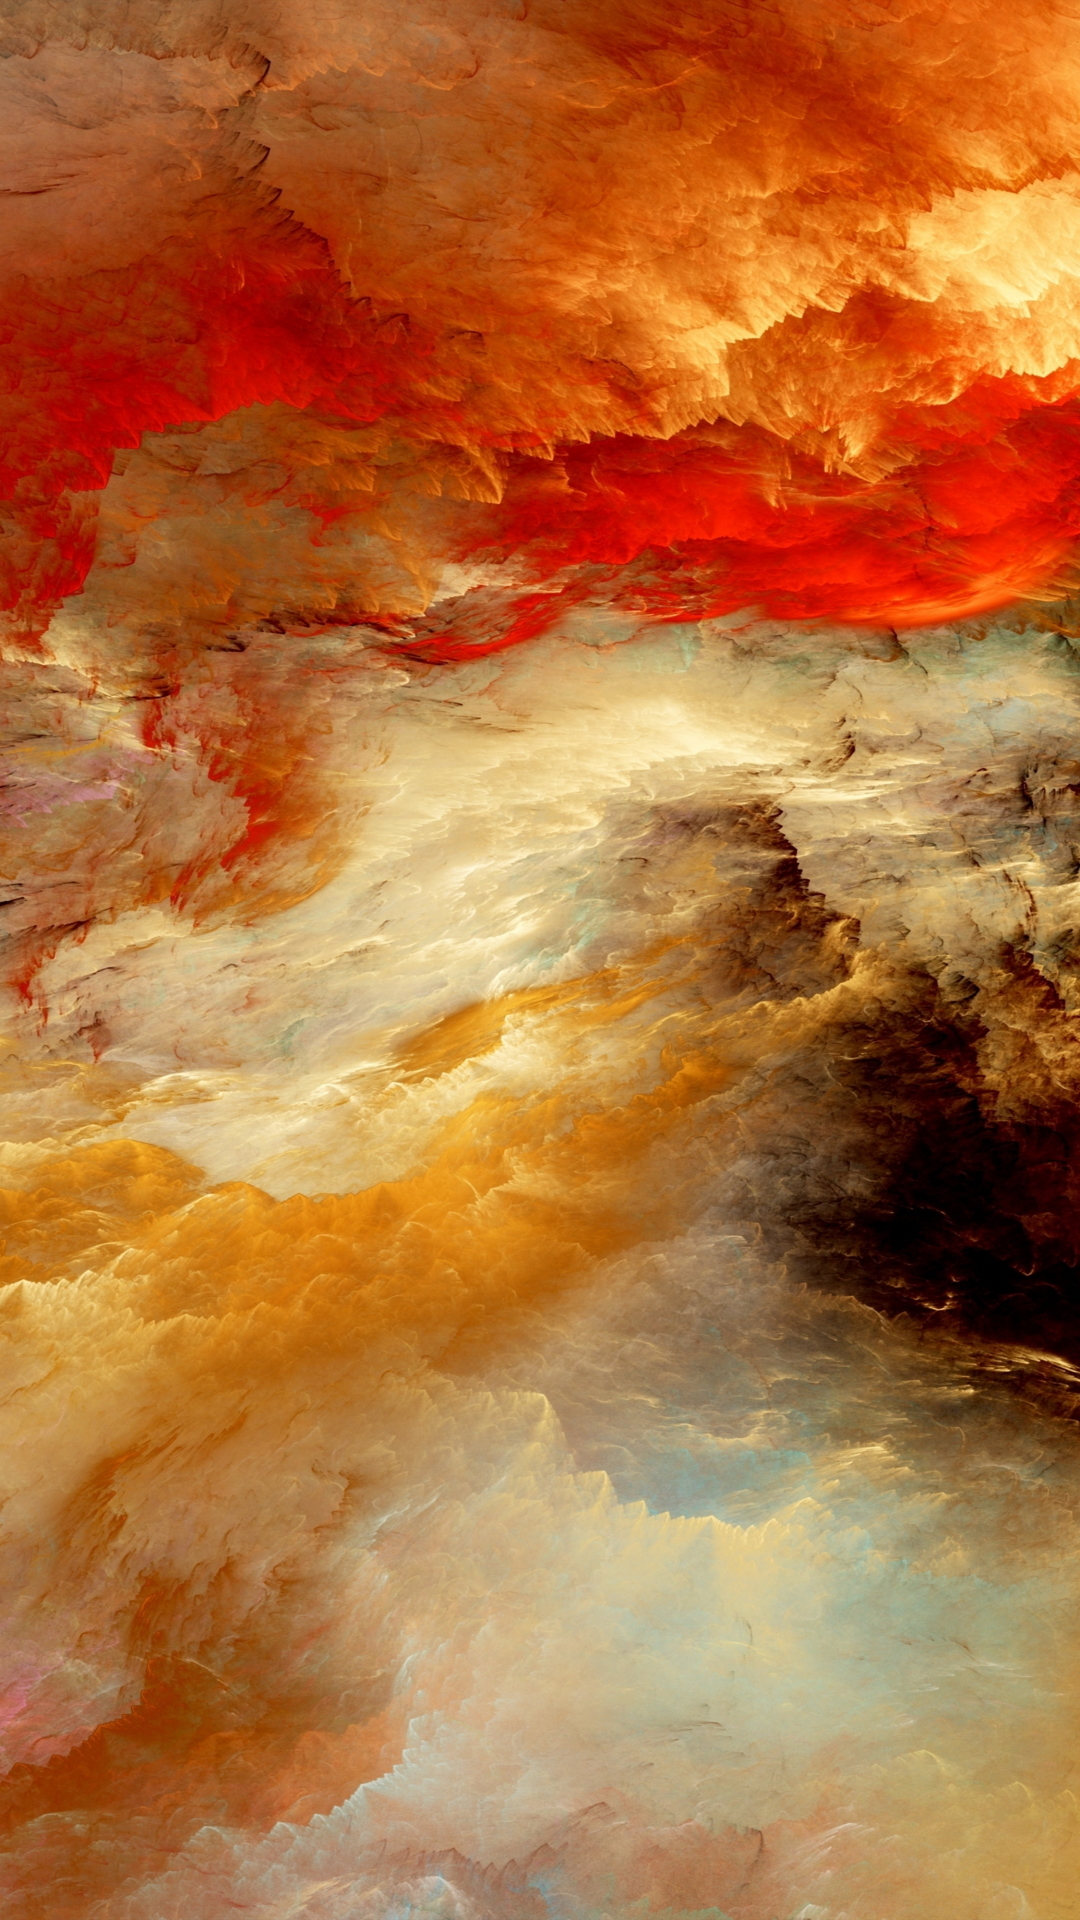 Artistic Clouds Wallpapers